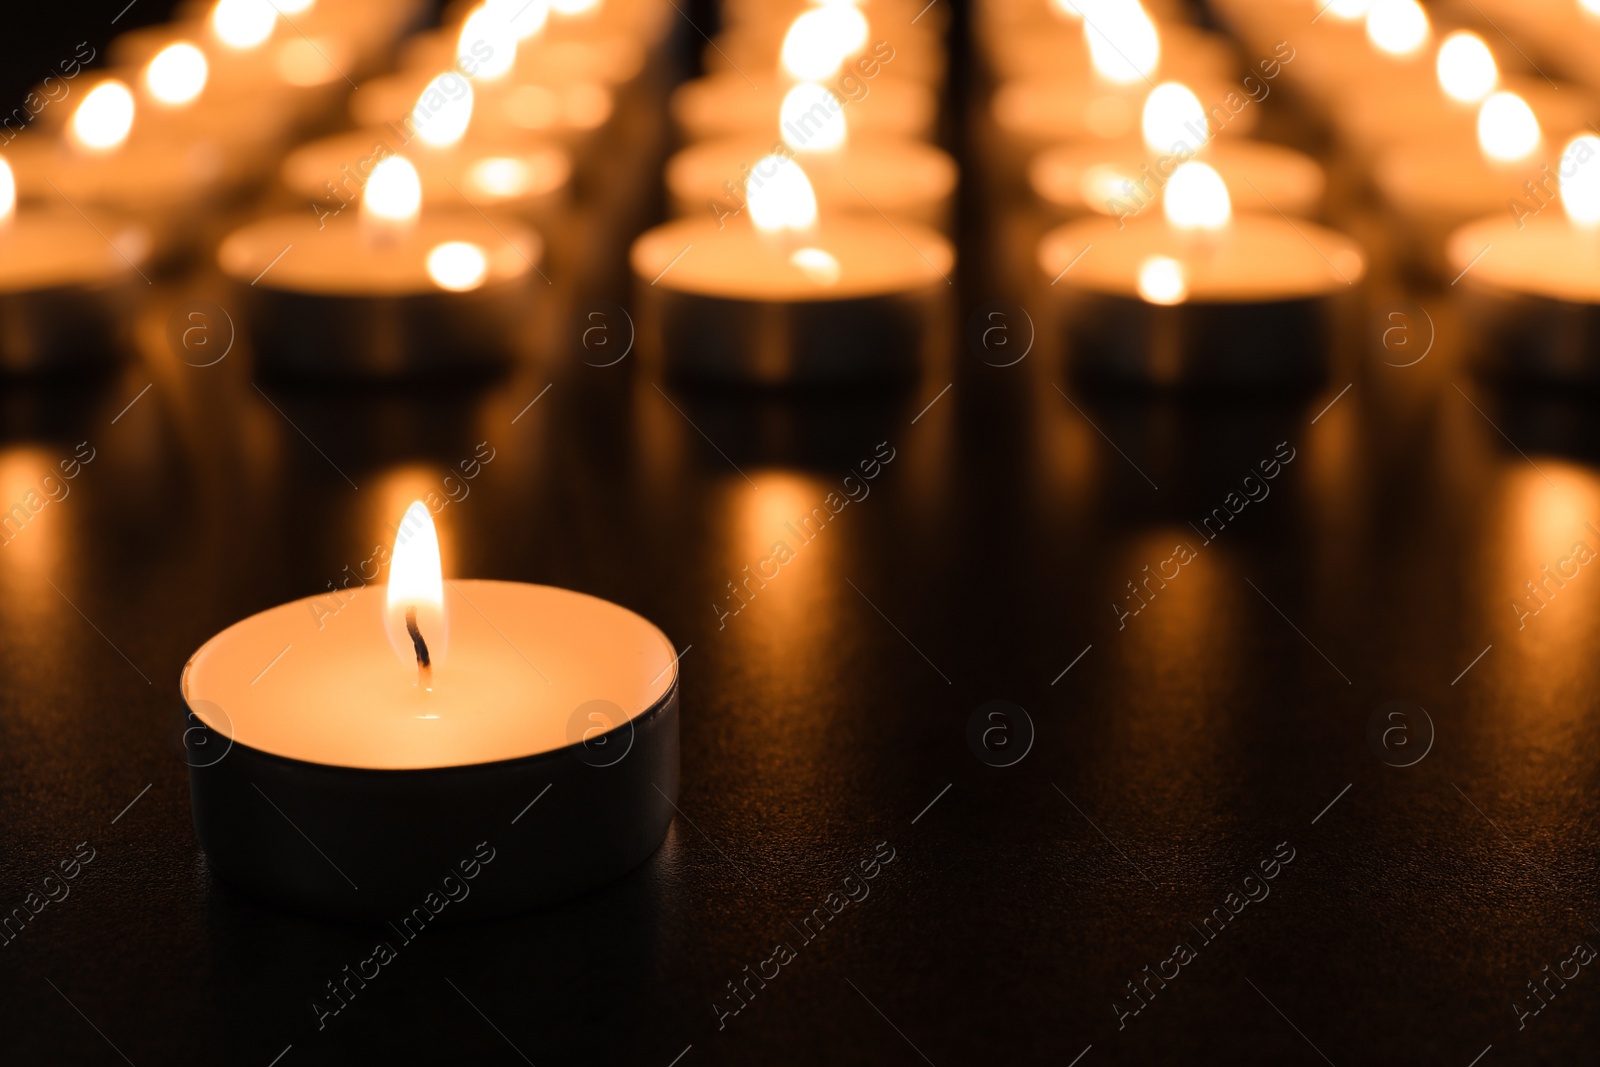 Photo of Wax candle burning on table in darkness, closeup